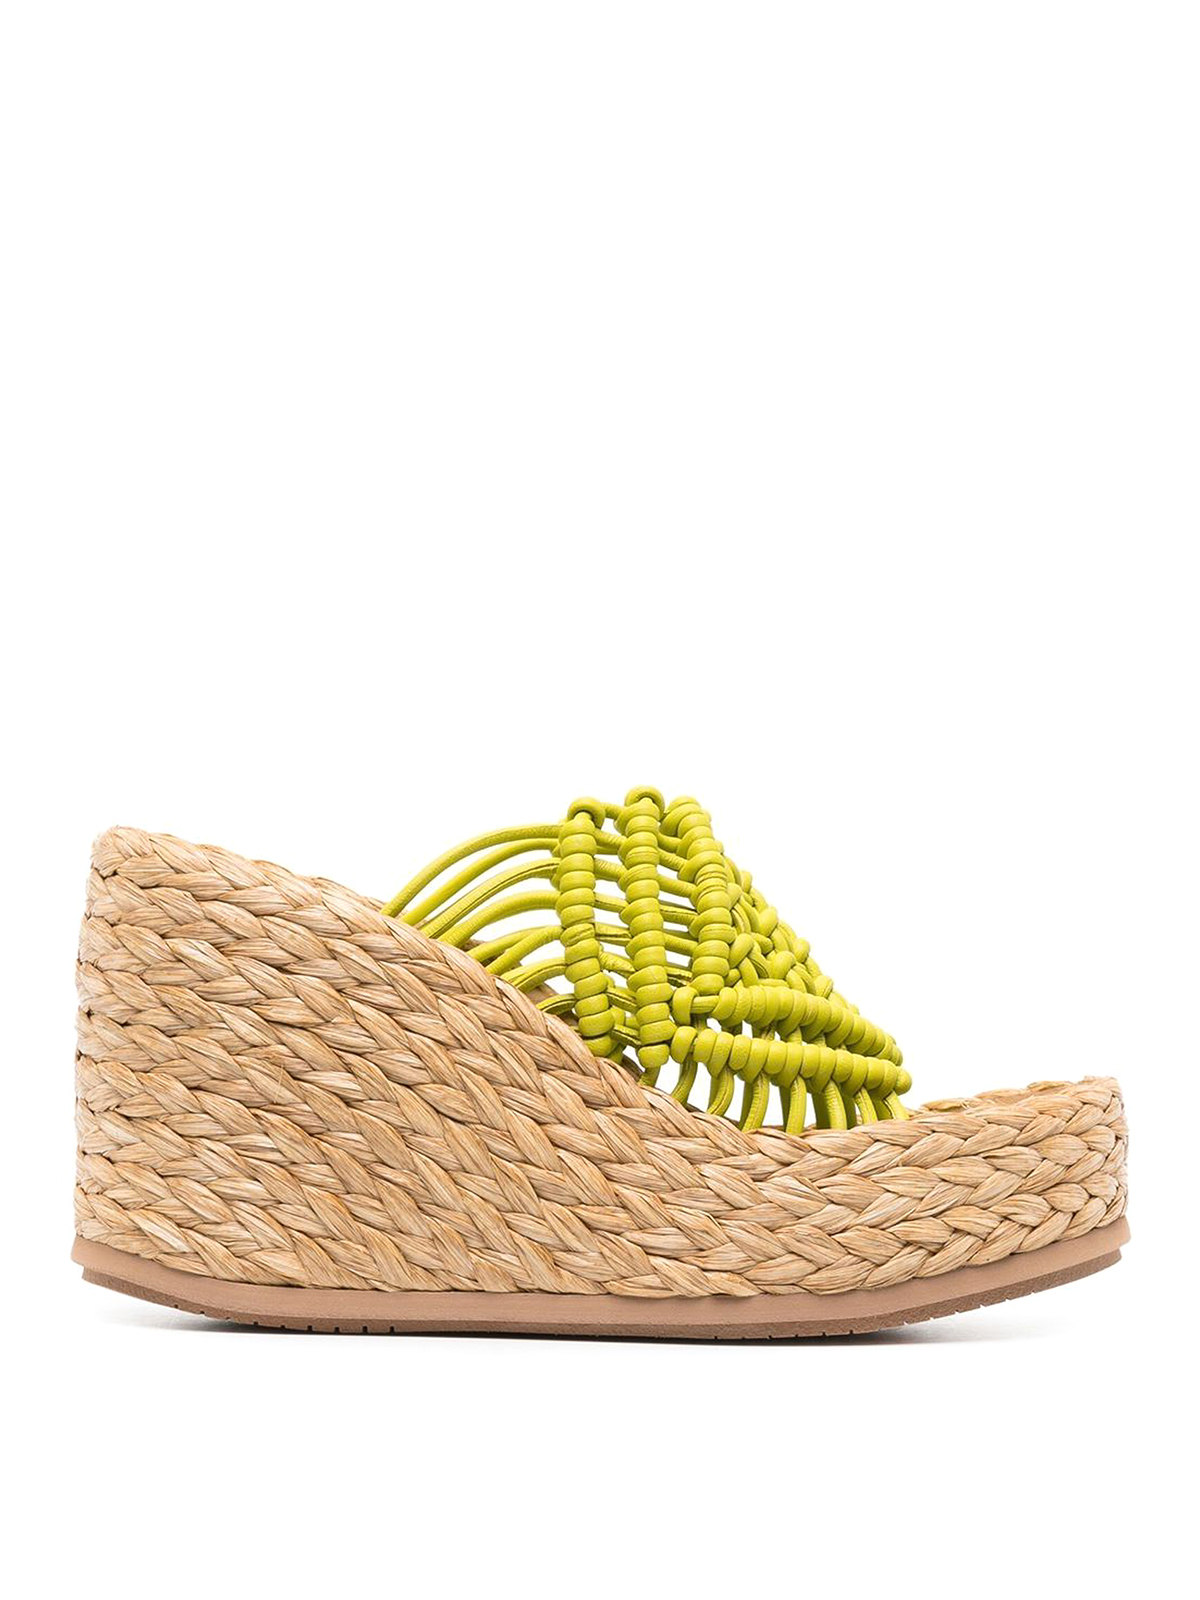 Melissa Yellow Jelly Fisherman Cage Sandals | Caged sandals, Clothes design,  Shop sandals